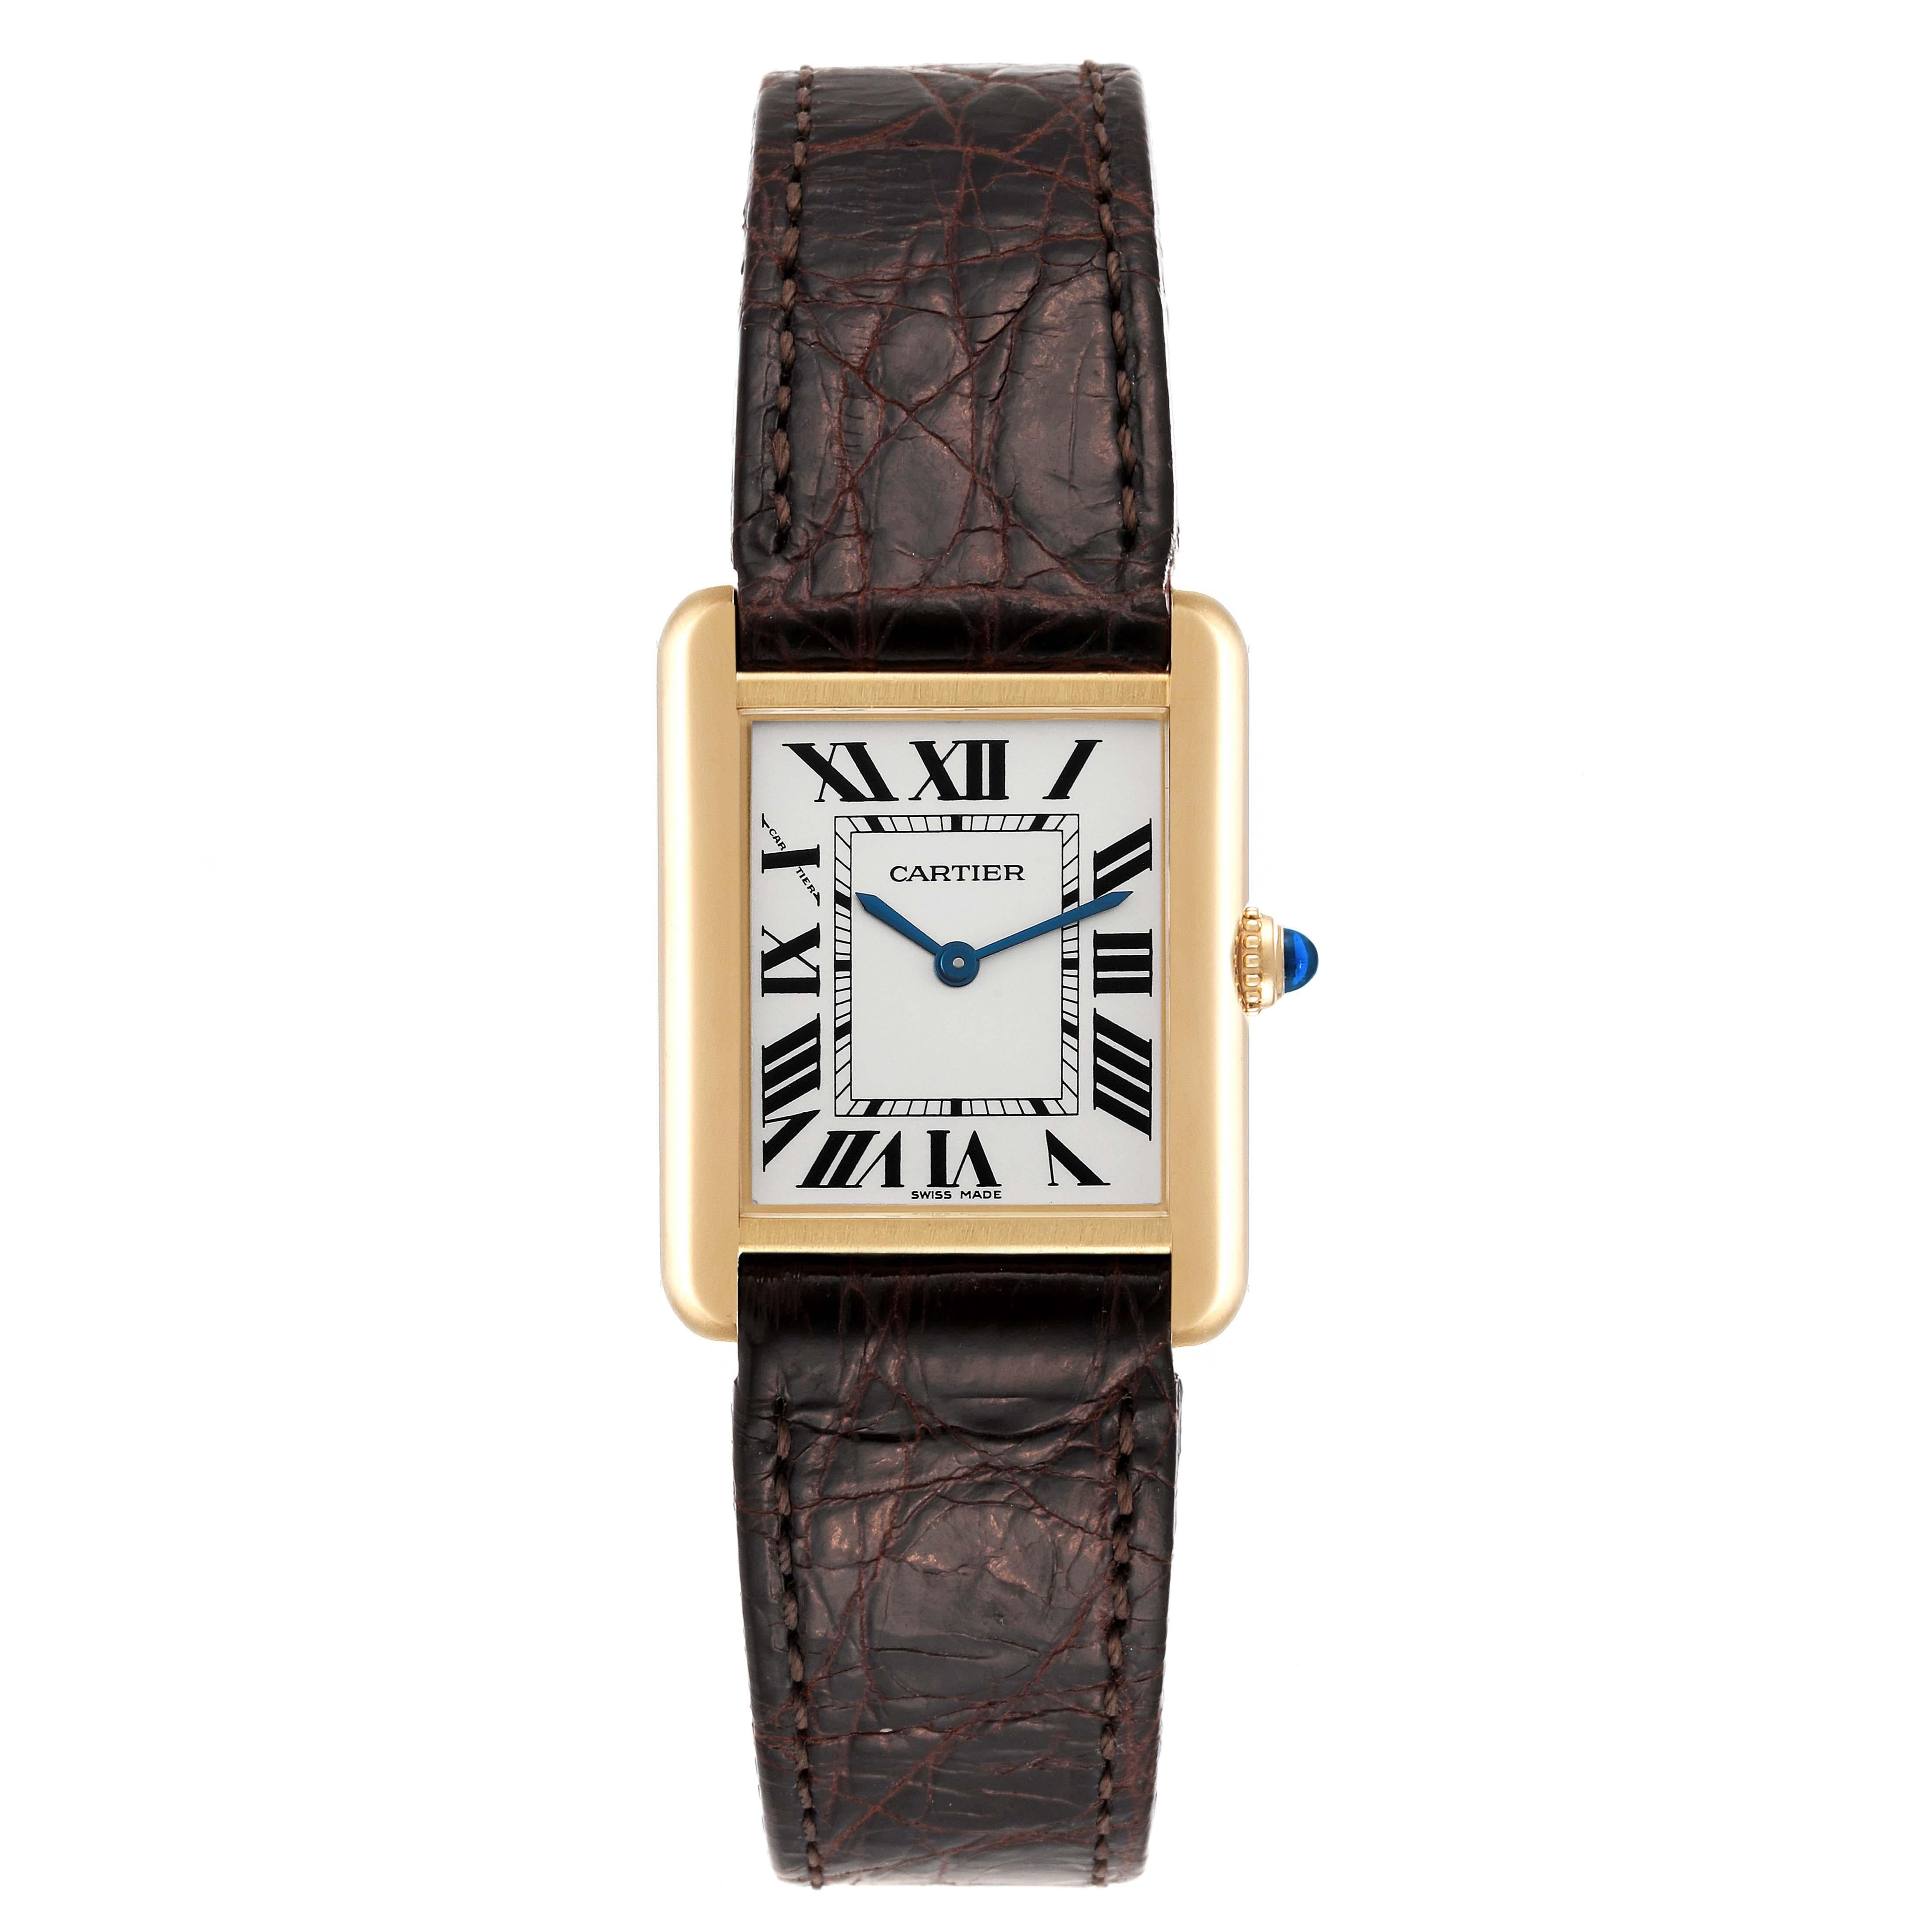 Cartier Tank Solo Small Yellow Gold Steel Silver Dial Ladies Watch W1018755. Quartz movement. 18k yellow gold case 30.0 x 23.0 mm. Stainless steel case back. Circular grained crown set with a blue spinel cabochon. . Scratch resistant sapphire